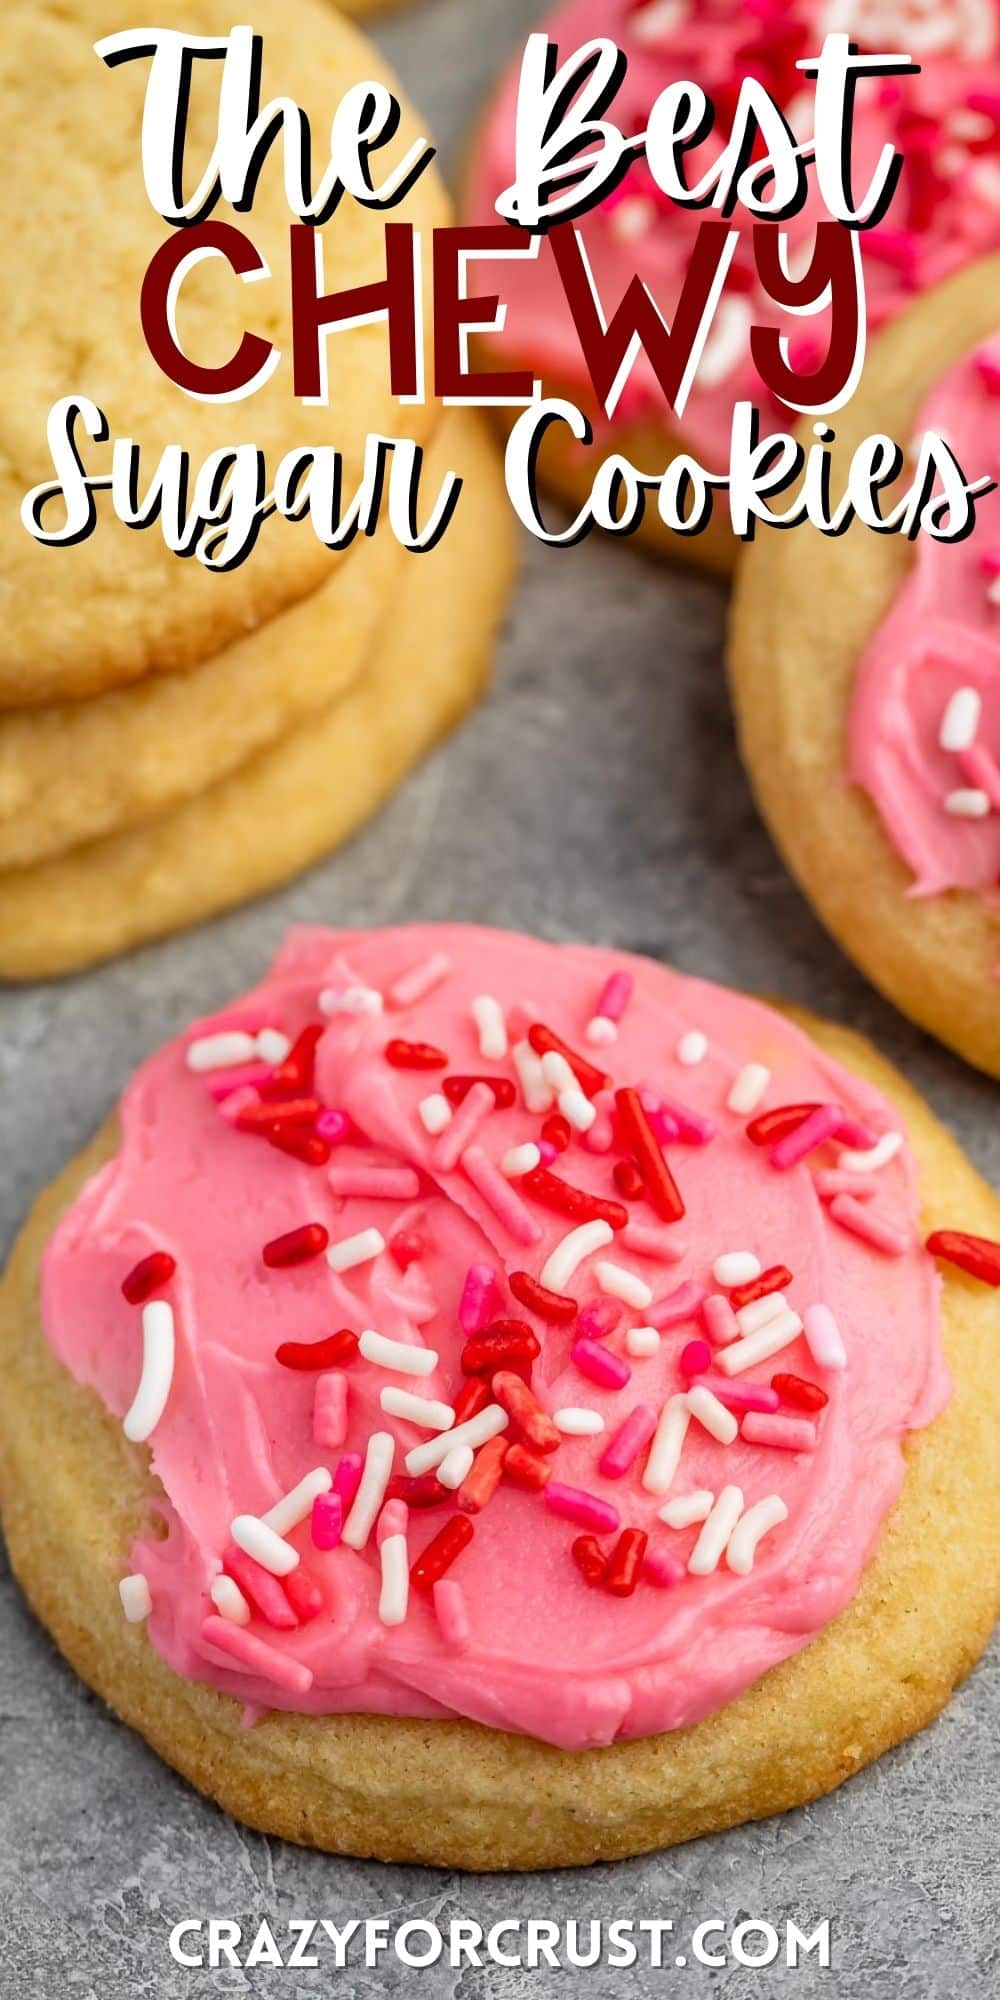 sugar cookie with pink frosting and red sprinkles with words on the image.